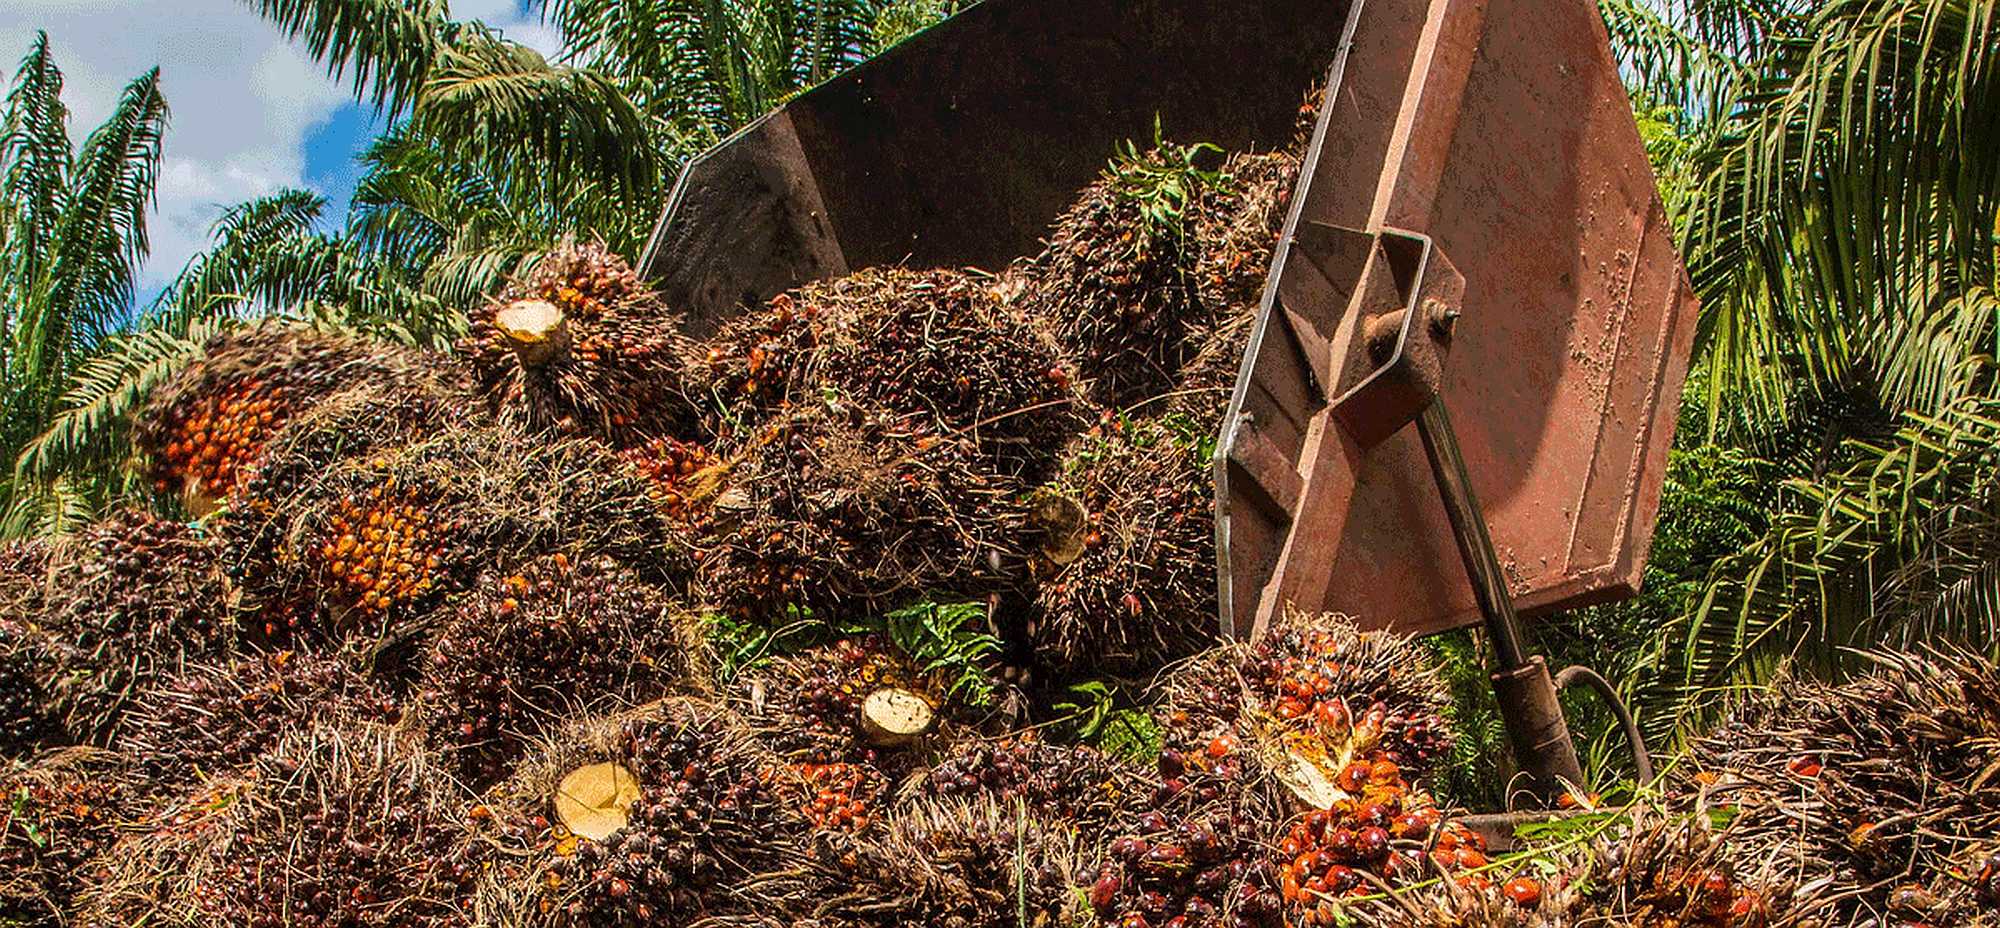 Harvest time at a palm oil plantation in Pará, Brazil. Photo by Miguel Pinheiro/CIFOR.